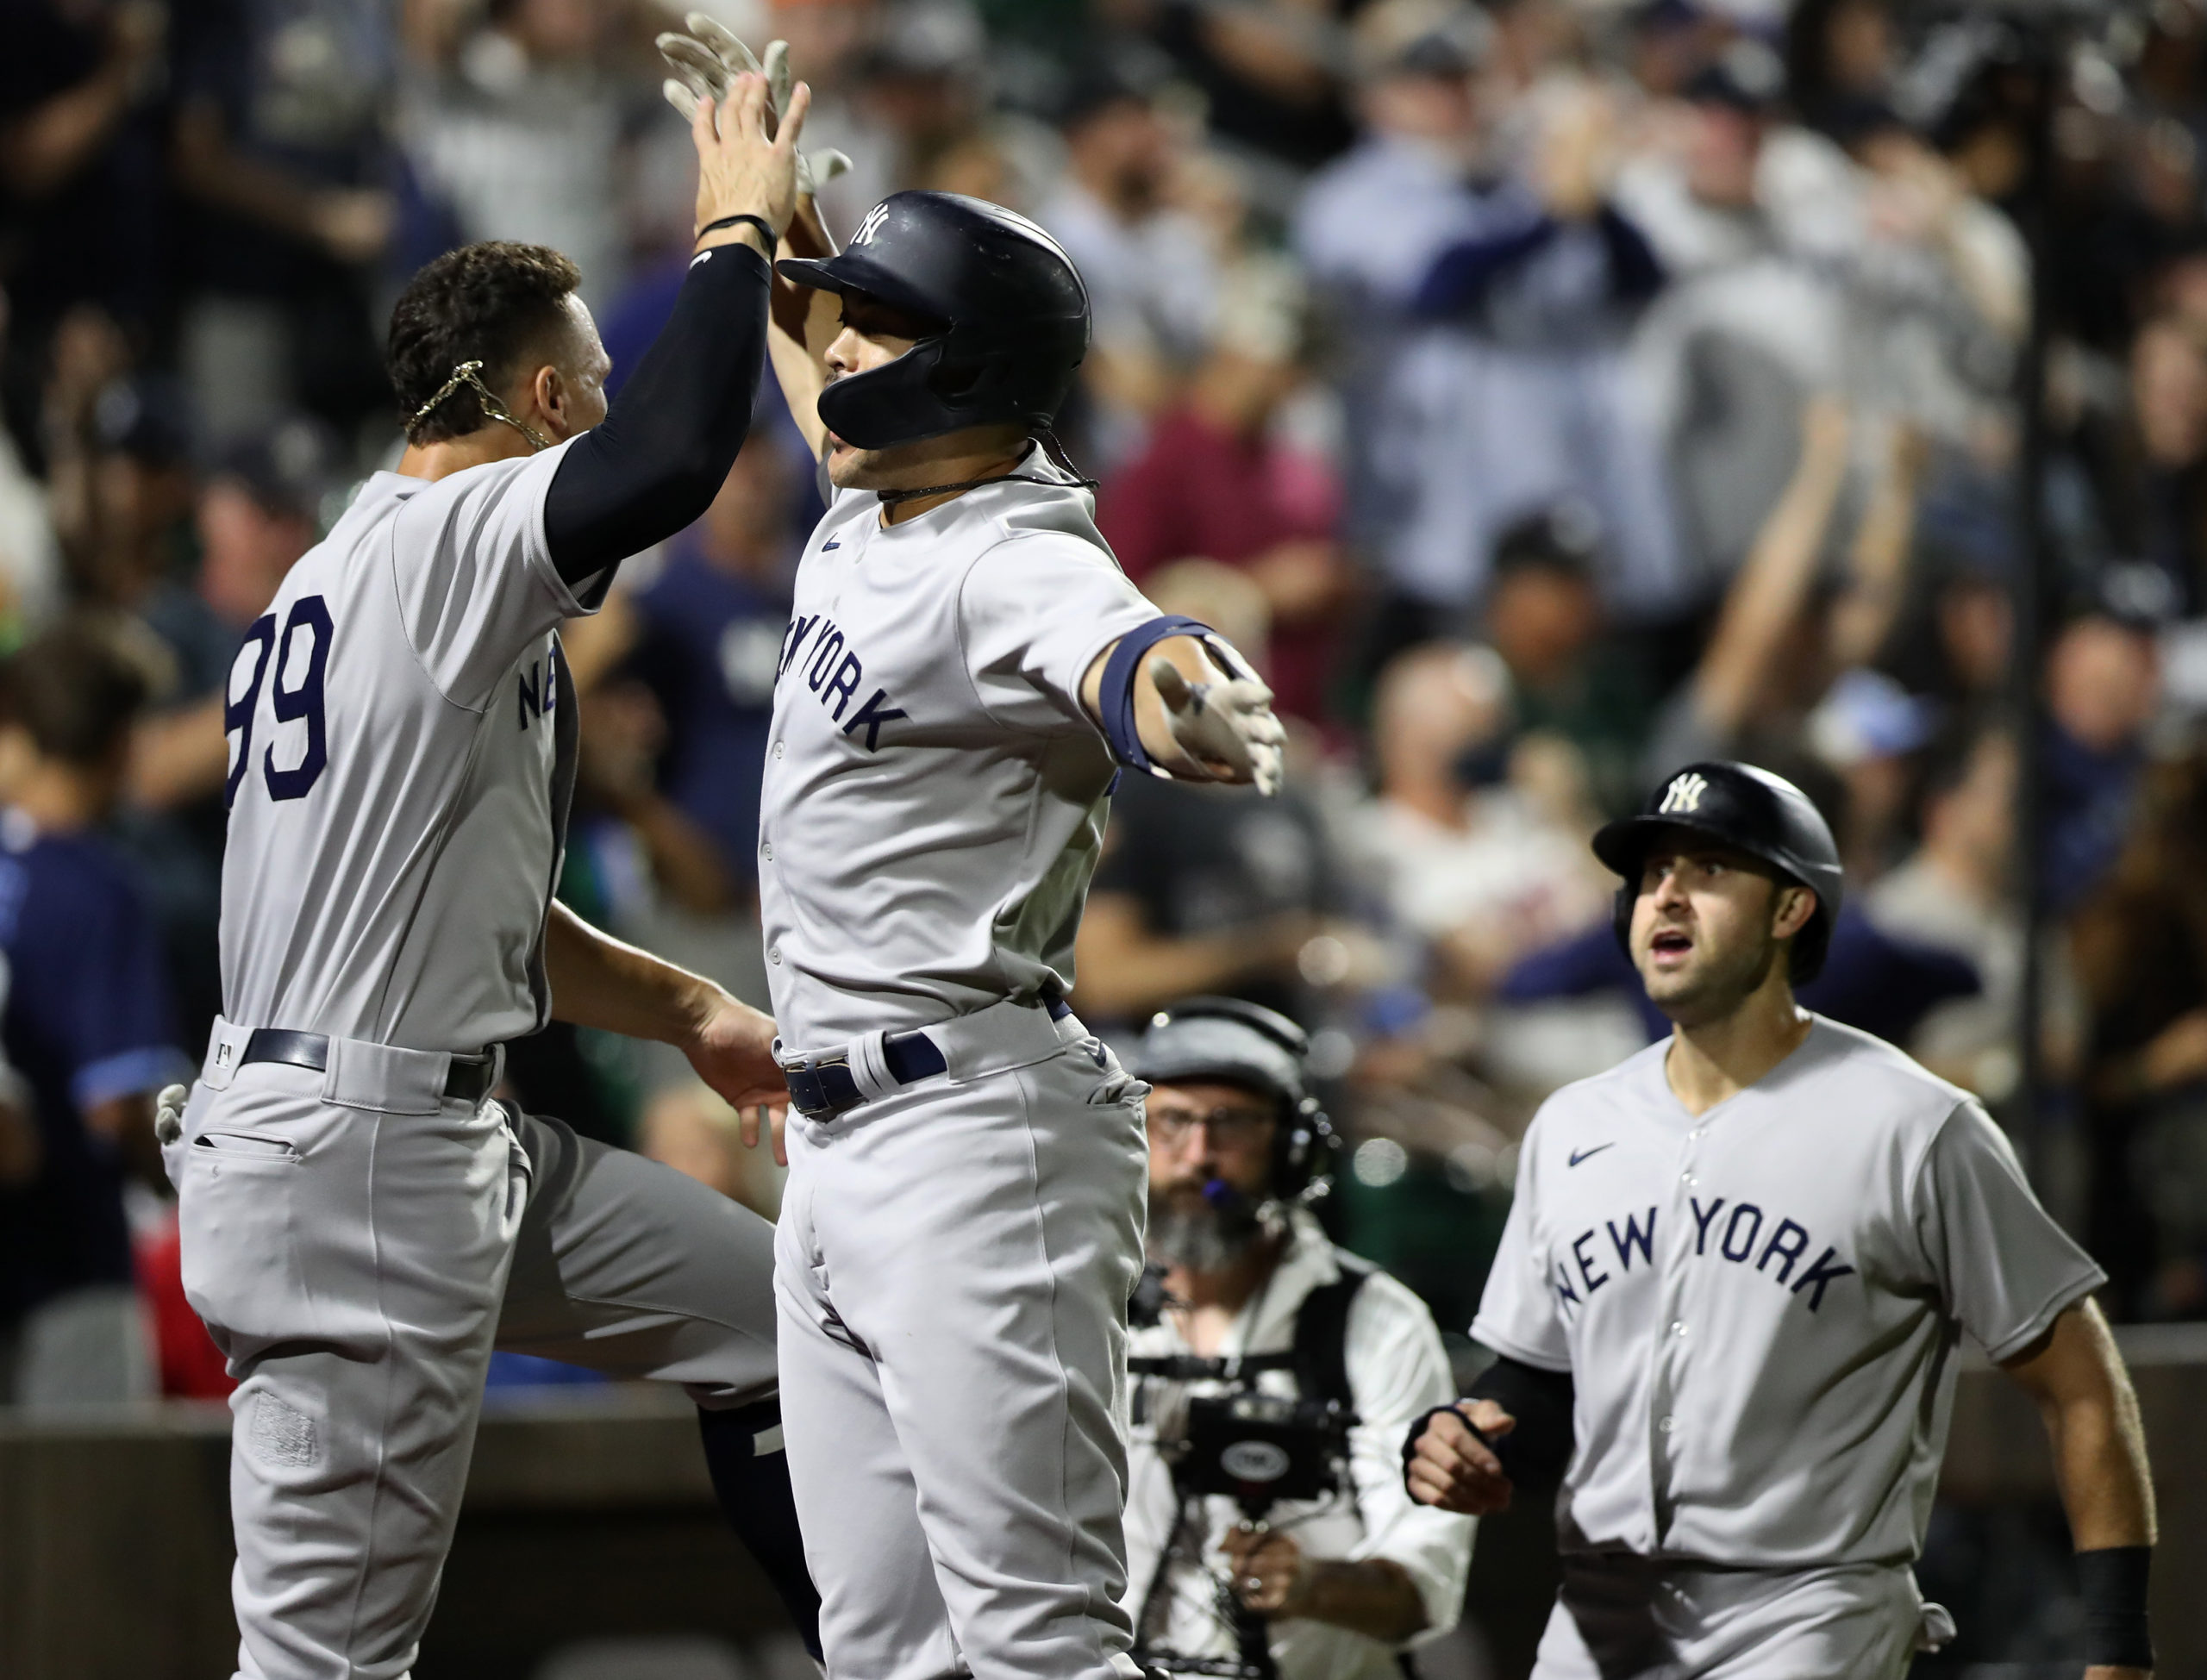 Yankees designated hitter Giancarlo Stanton (middle) celebrates with right fielder Aaron Judge (99) after hitting a home run against the Chicago White Sox during the ninth inning at the Field of Dreams.